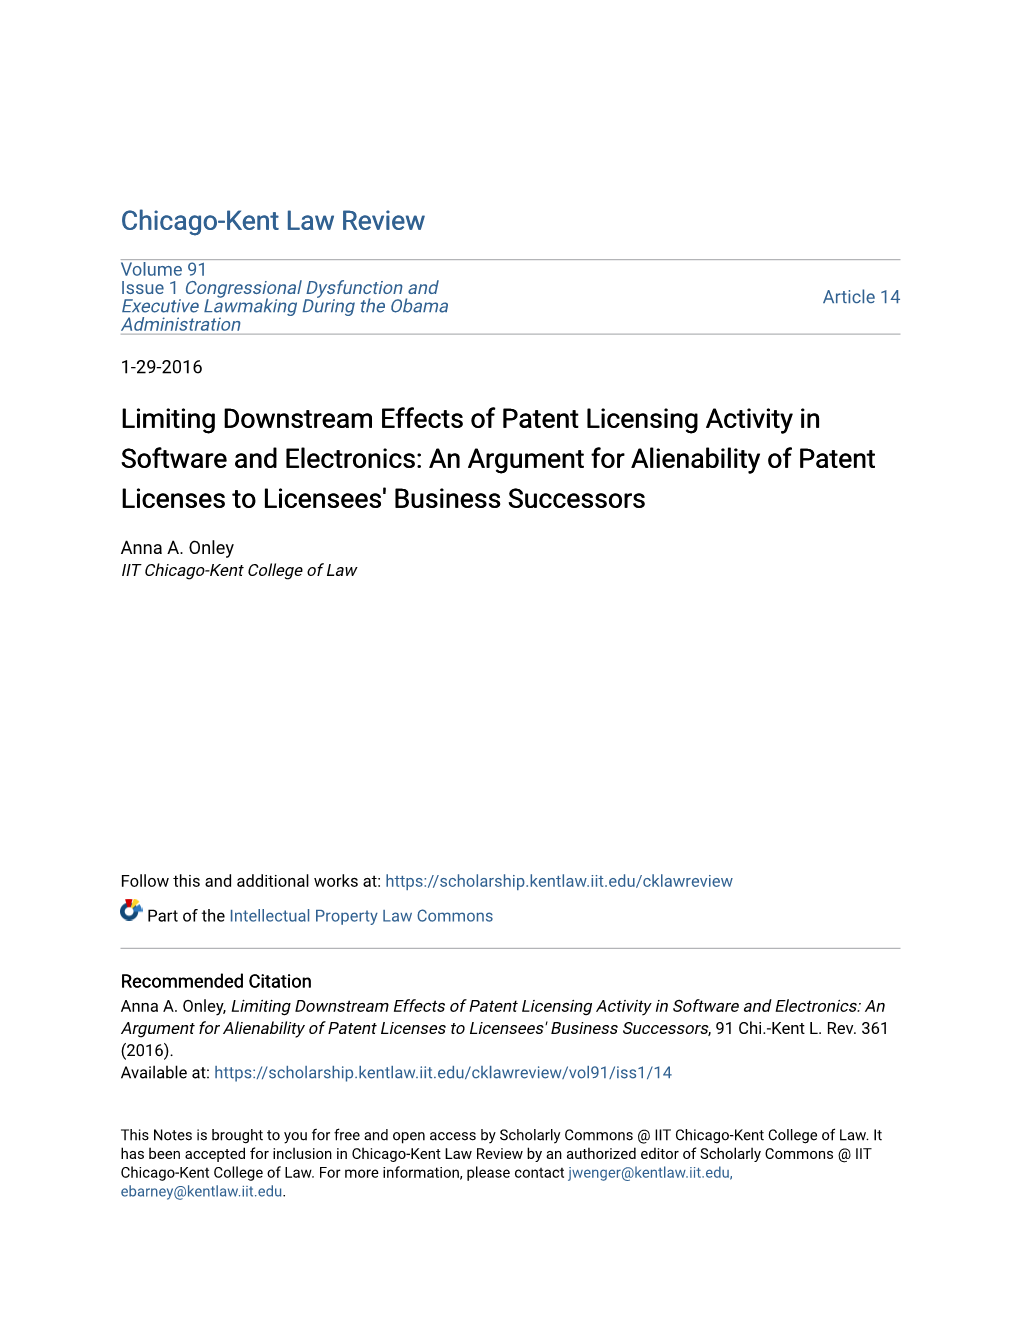 Limiting Downstream Effects of Patent Licensing Activity in Software And